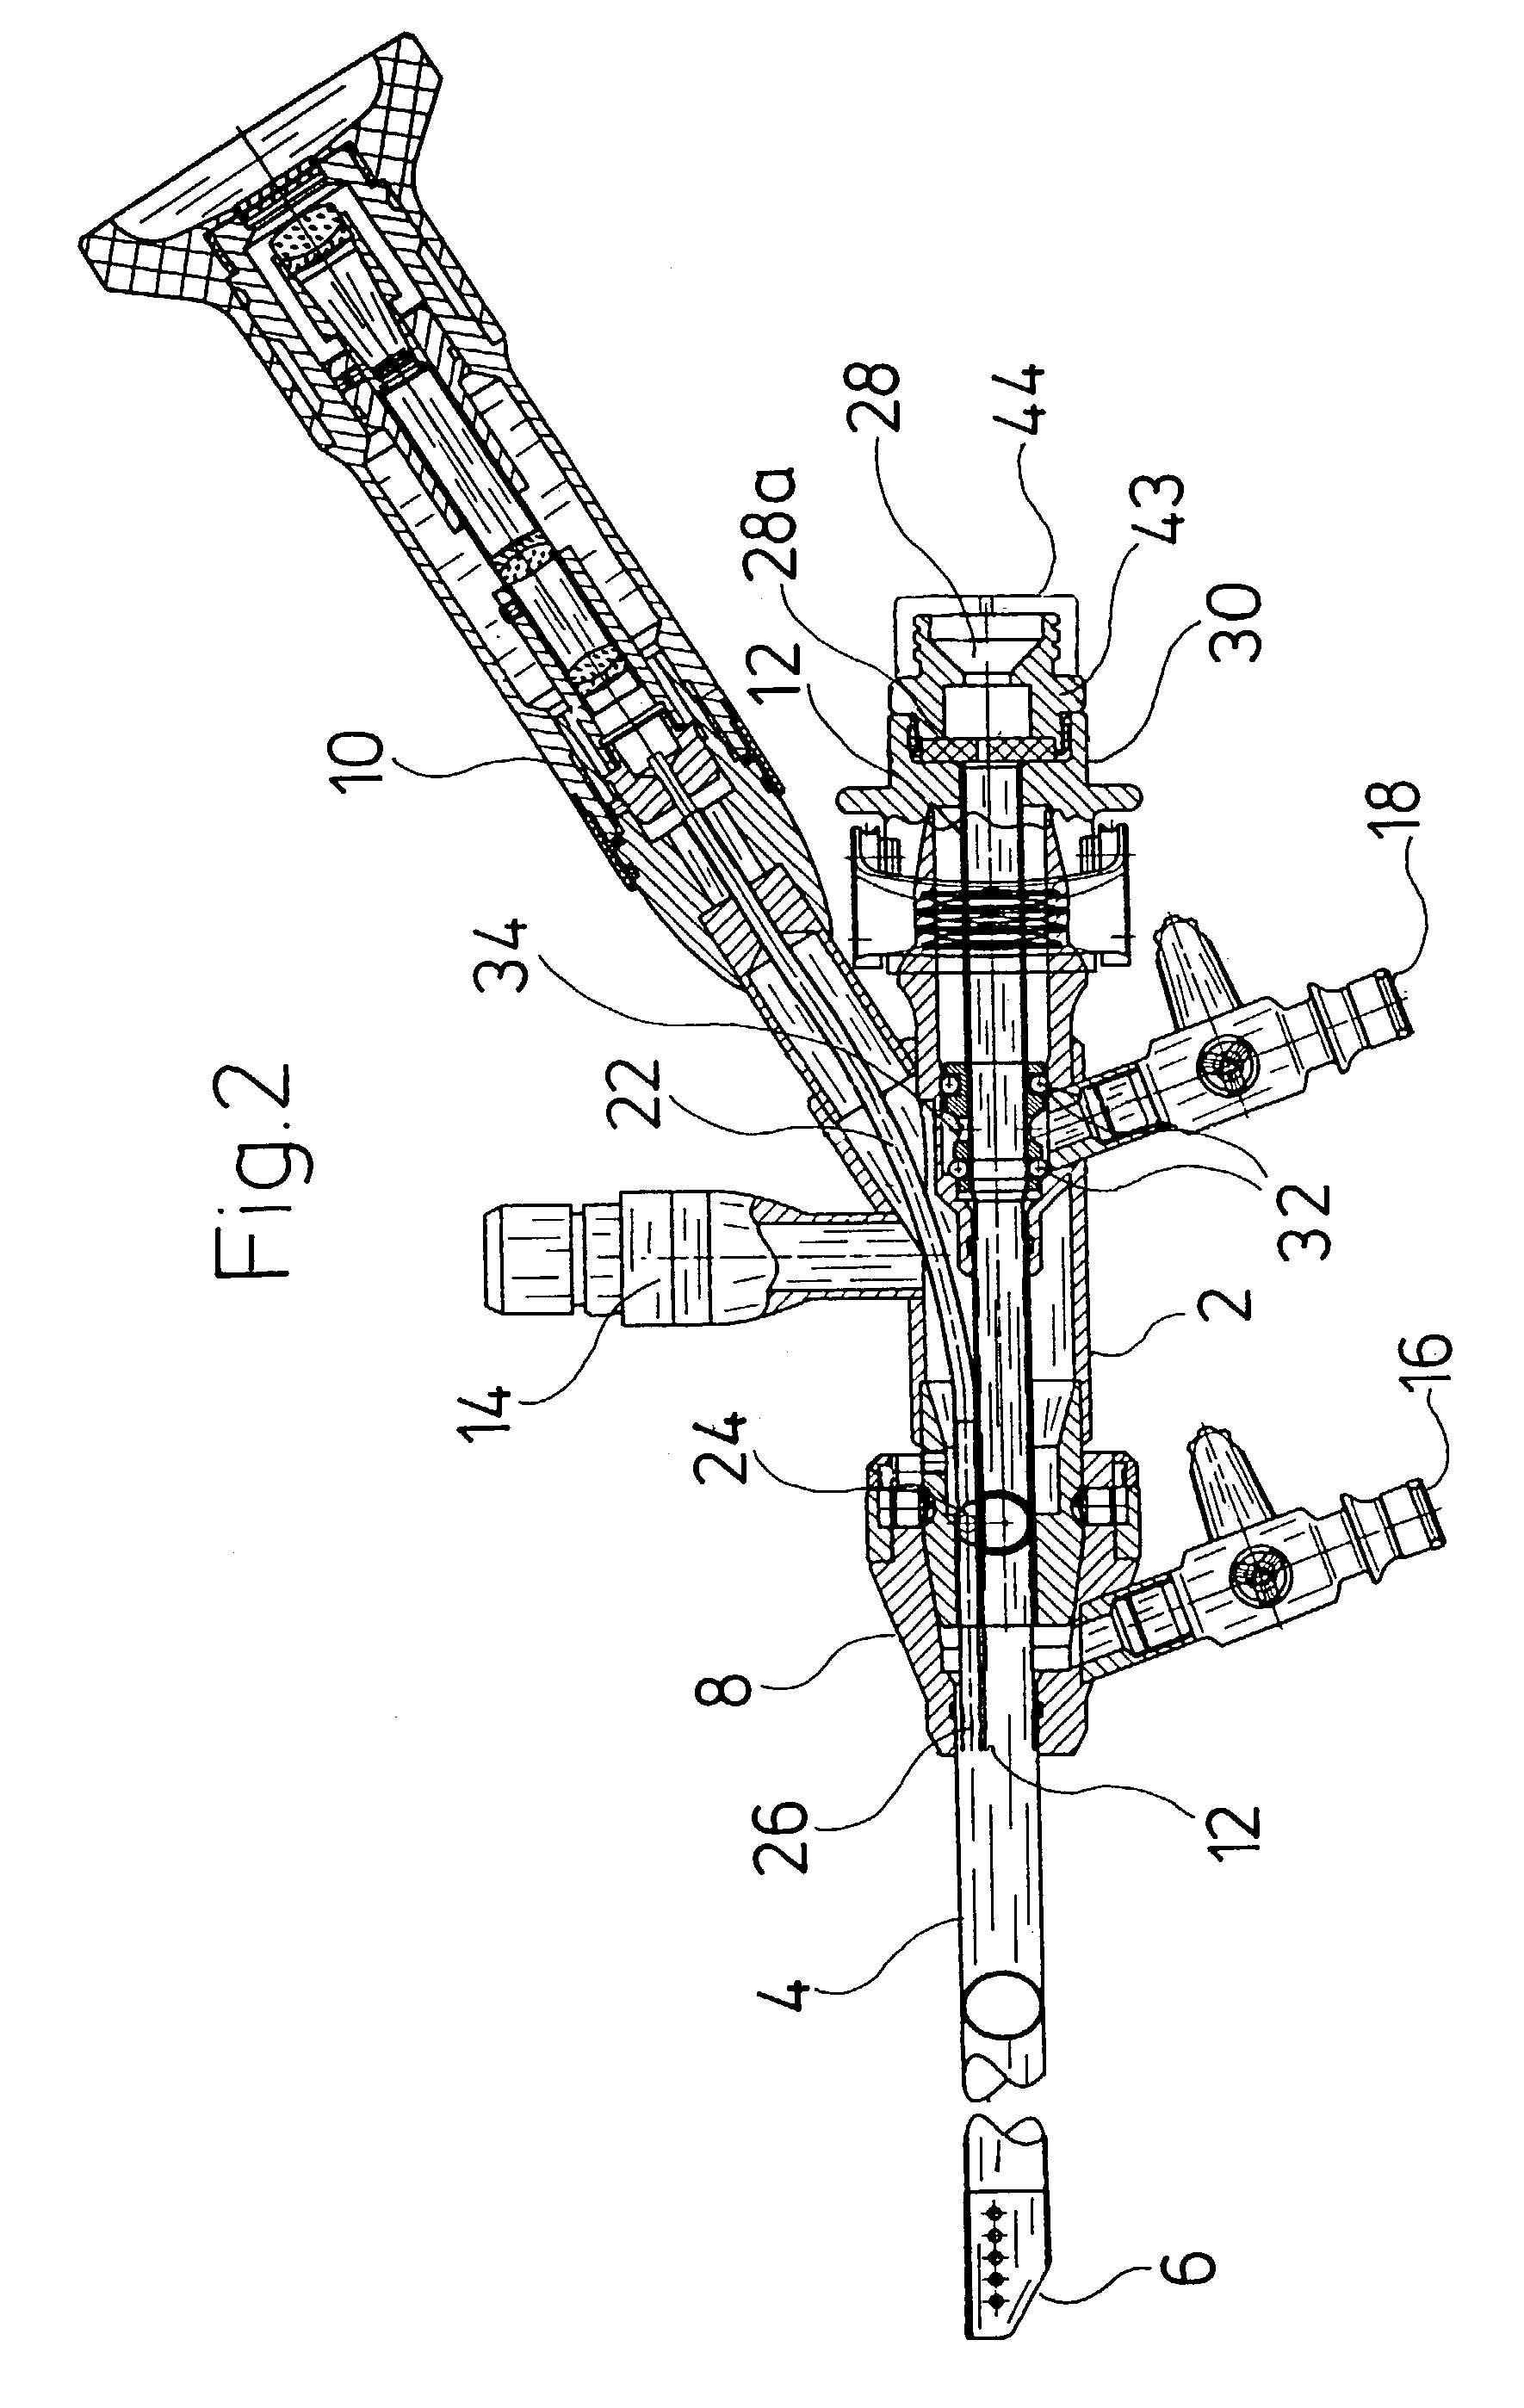 Hysteroscope with a shank exchange system